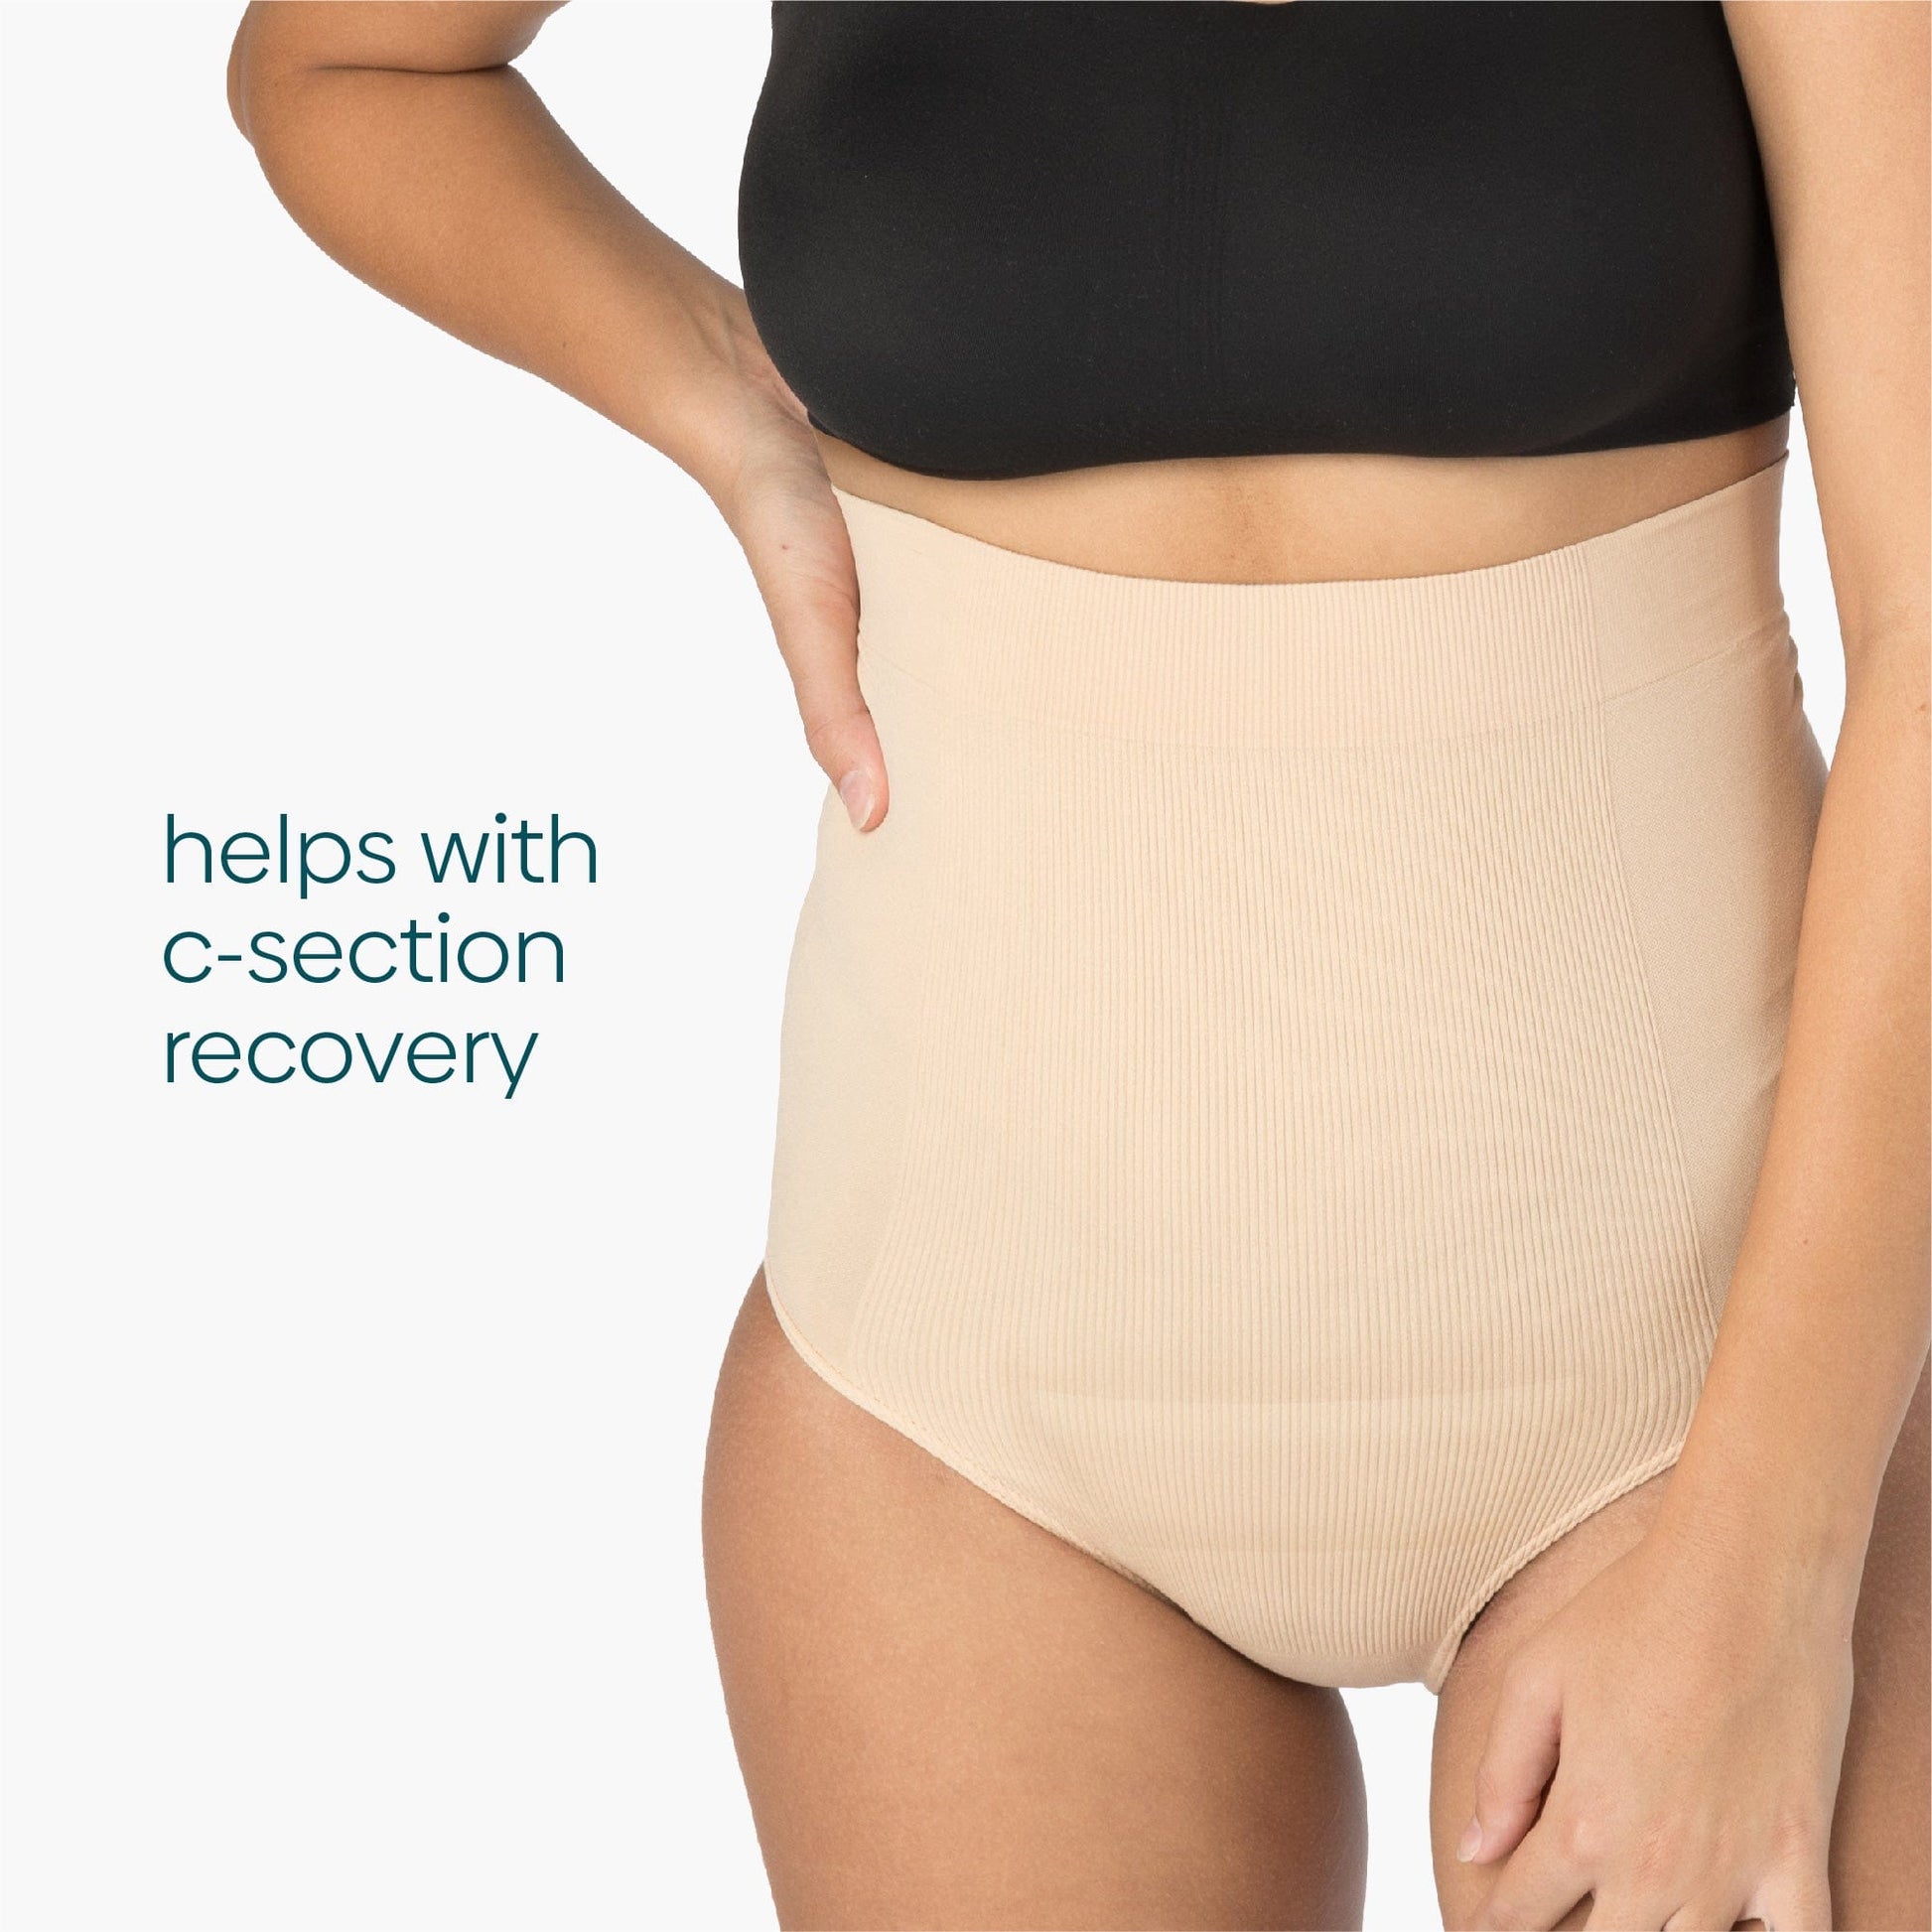 An image of a woman wearing nude colored C Panties, which help with c-section recovery